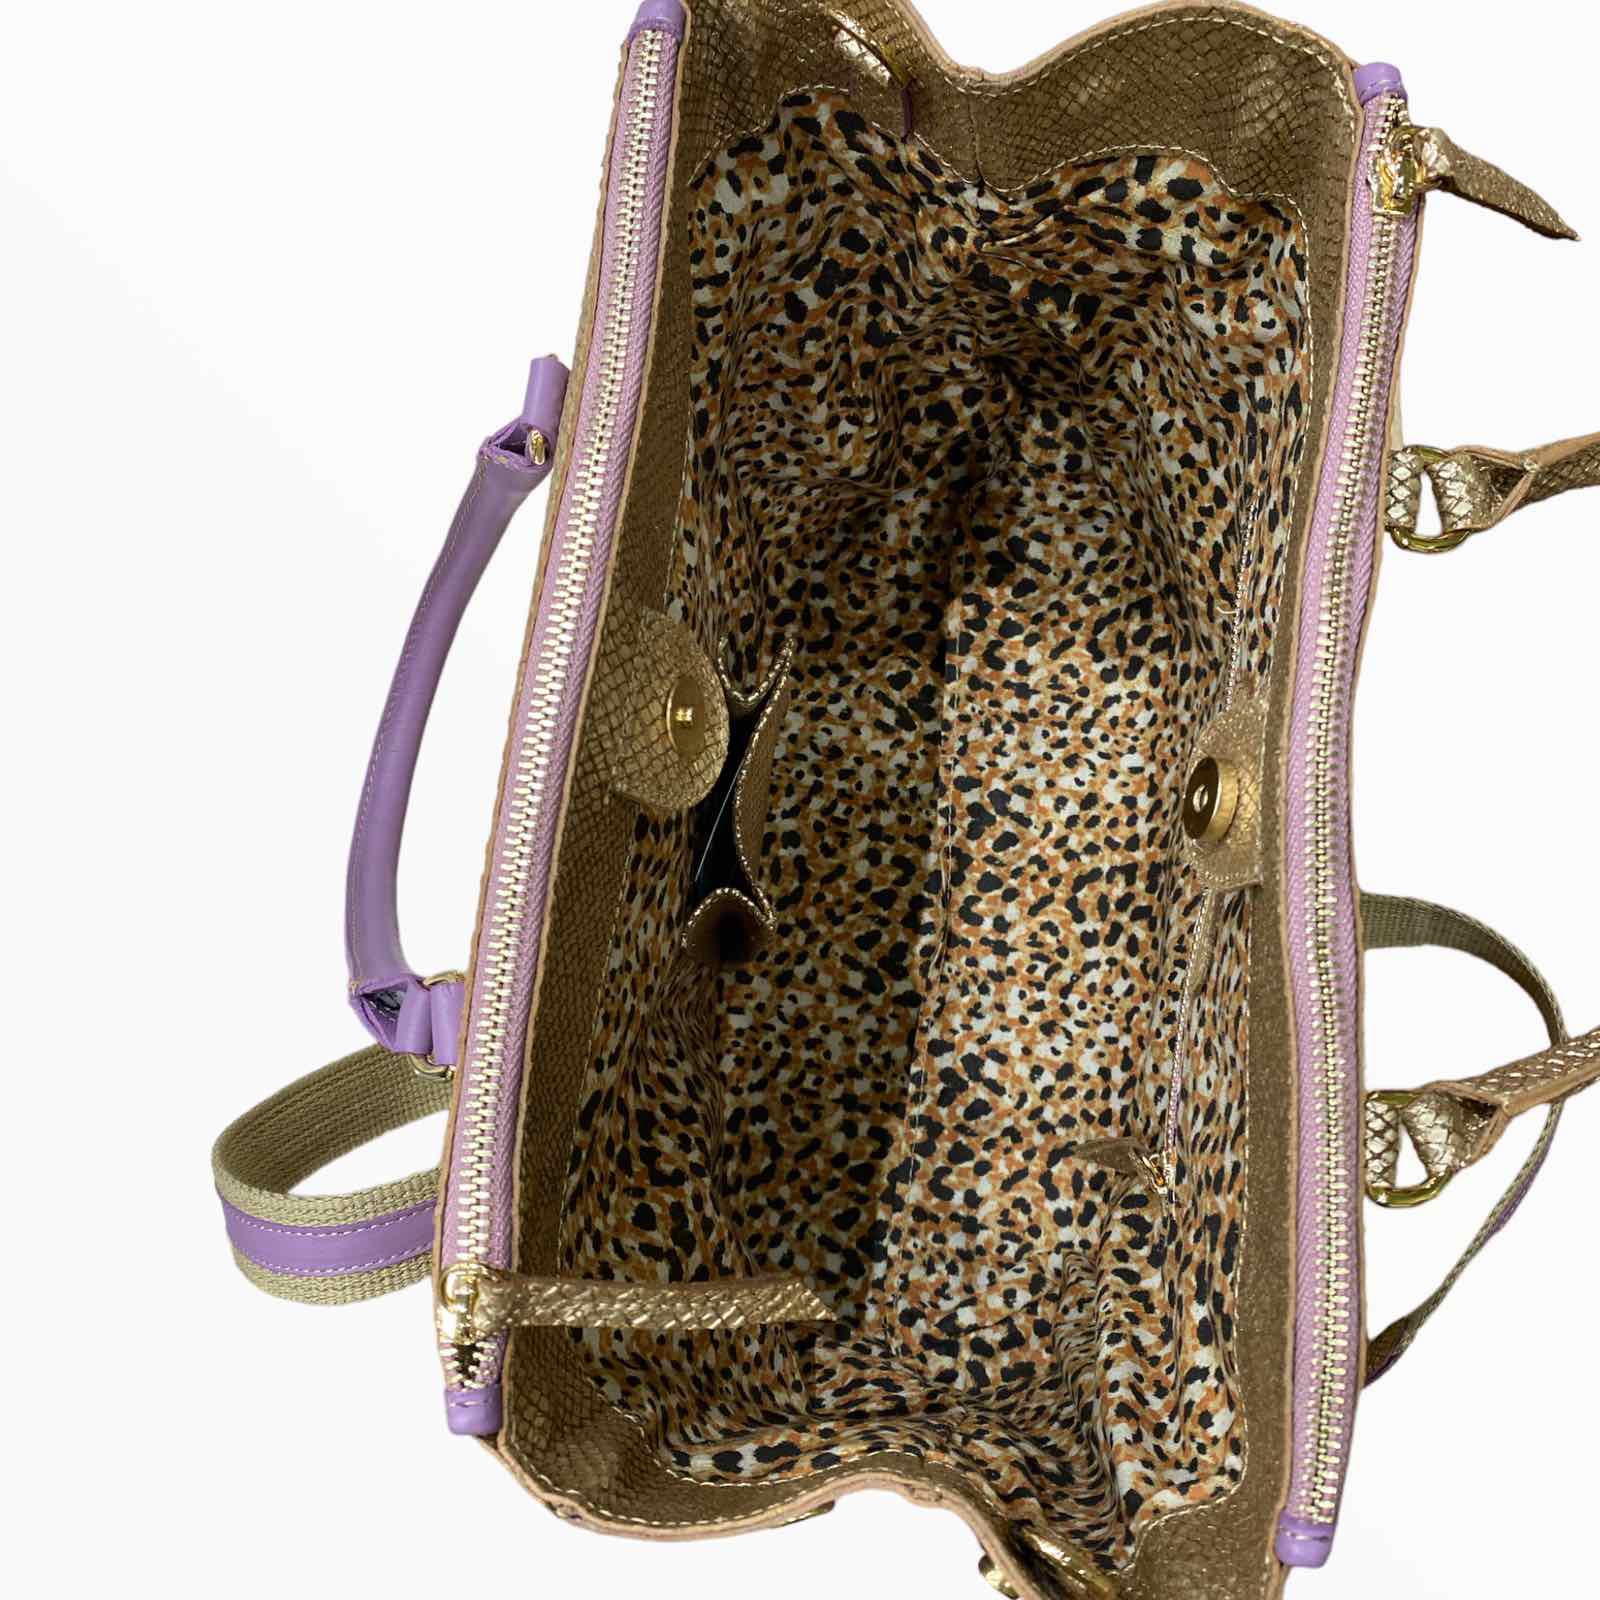 Diana M. Gold and lilac leather tote bag